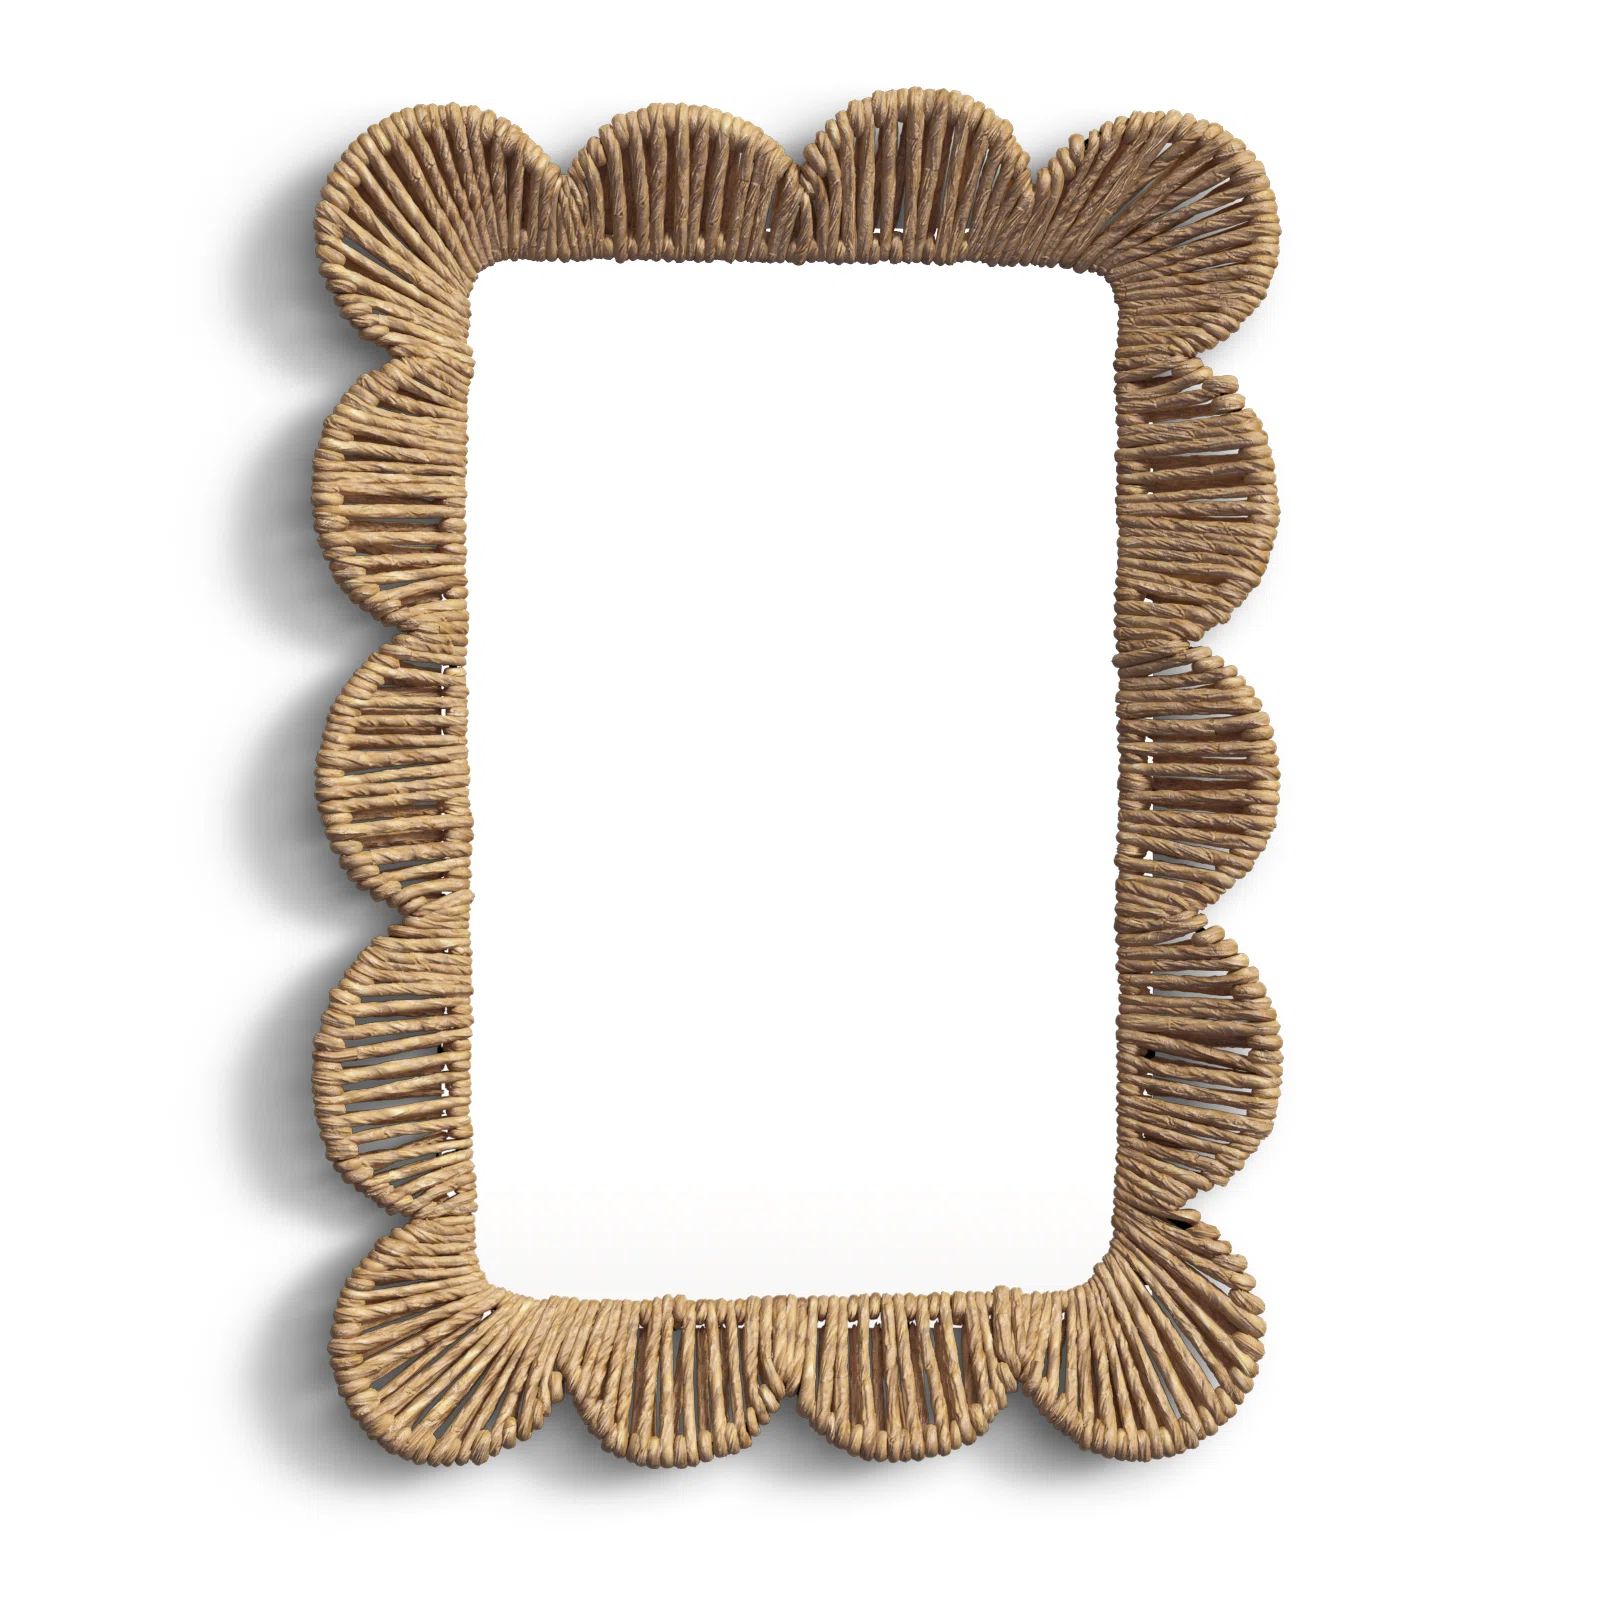 Nicholas Jute Framed Wall Mounted Accent Mirror in Natural Rattan | Wayfair North America